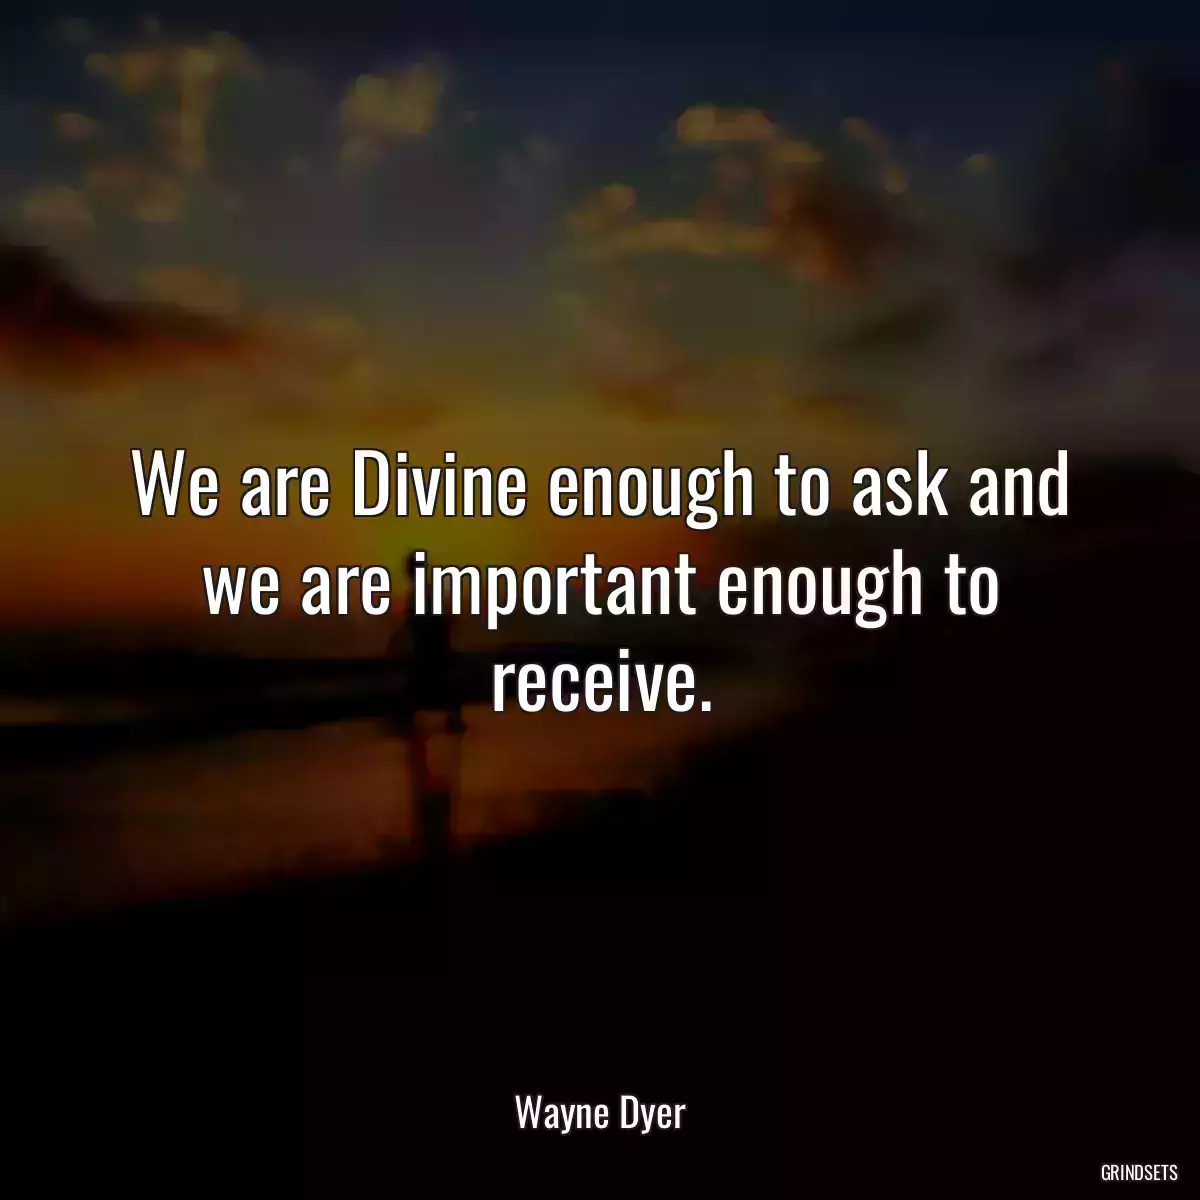 We are Divine enough to ask and we are important enough to receive.